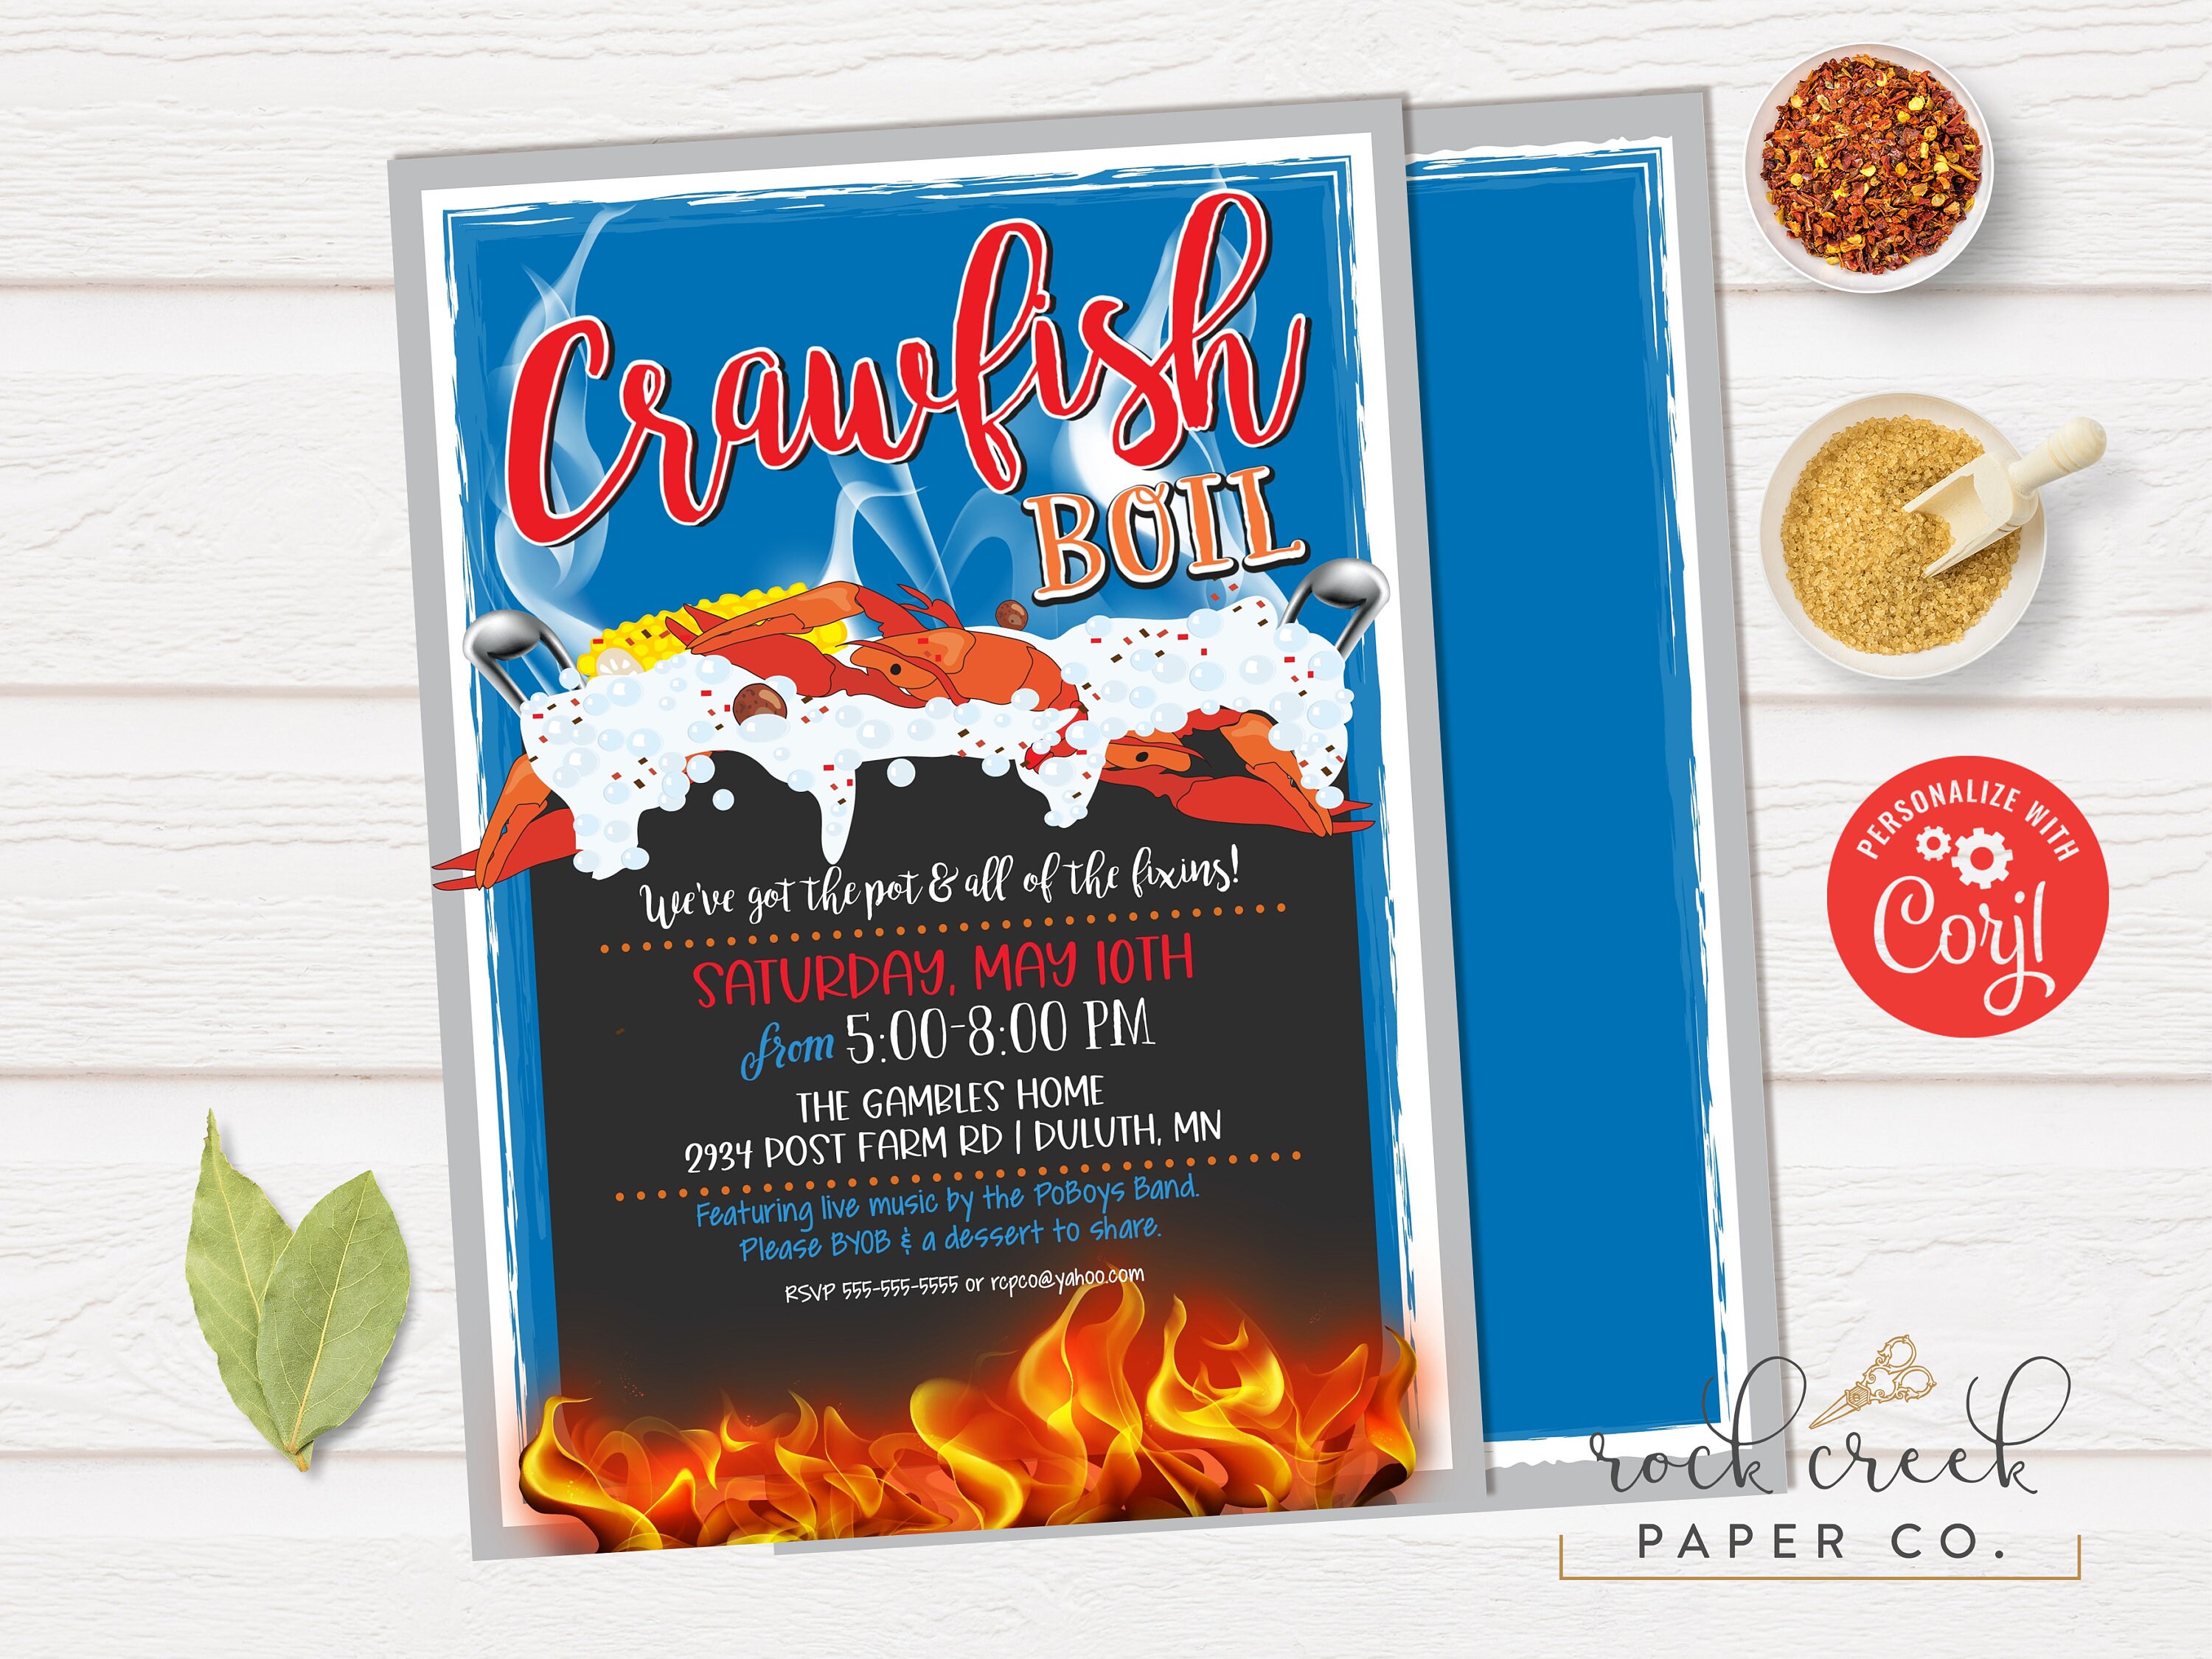 Crawfish Boil Invitation, Seafood Low Country Digital Party Instant Access